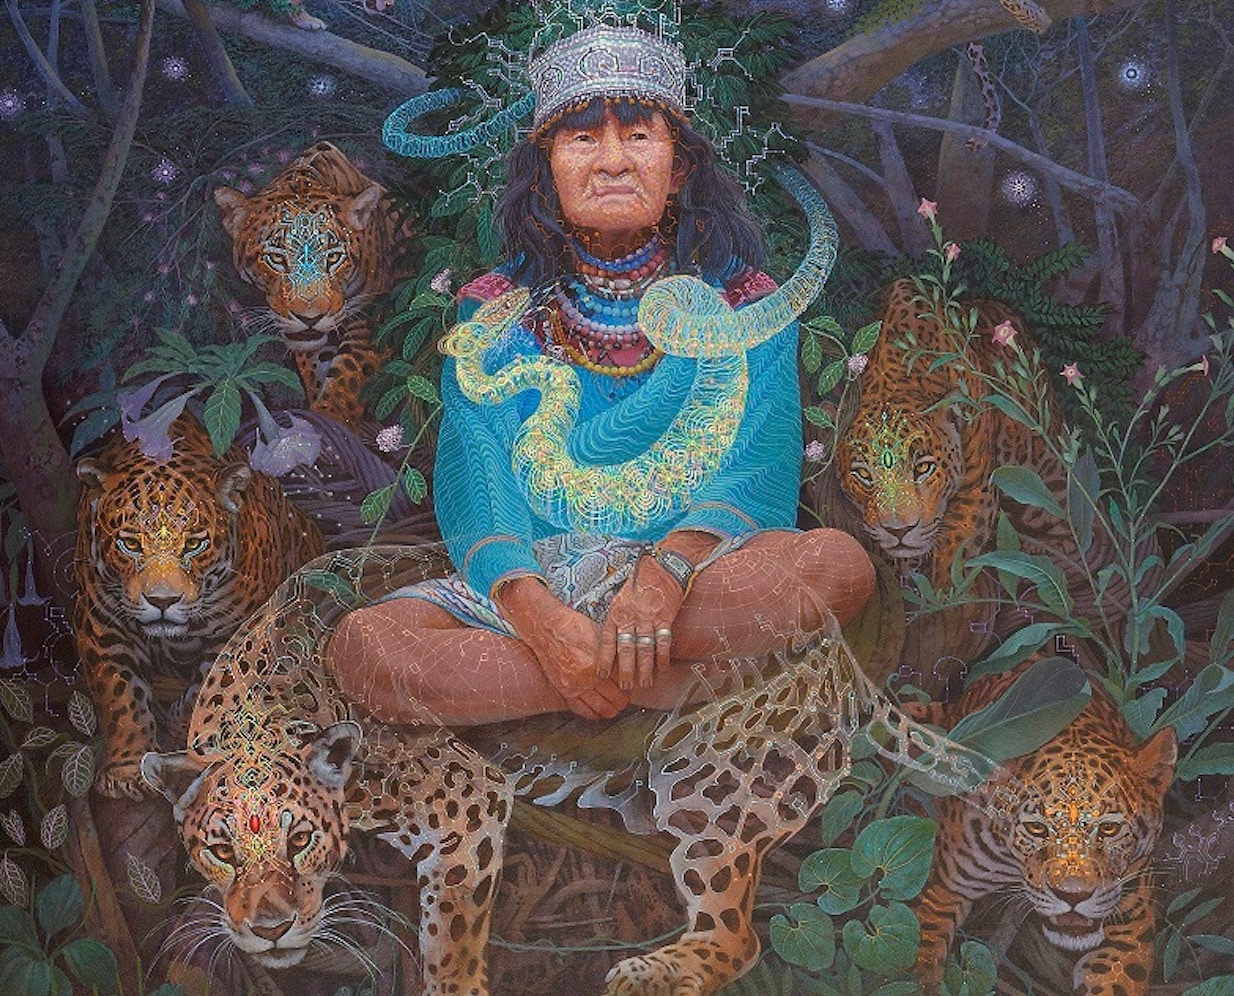 The late Oliva Arevalo captured by visionary artist Luis Tamani, in his painting called Guardianes